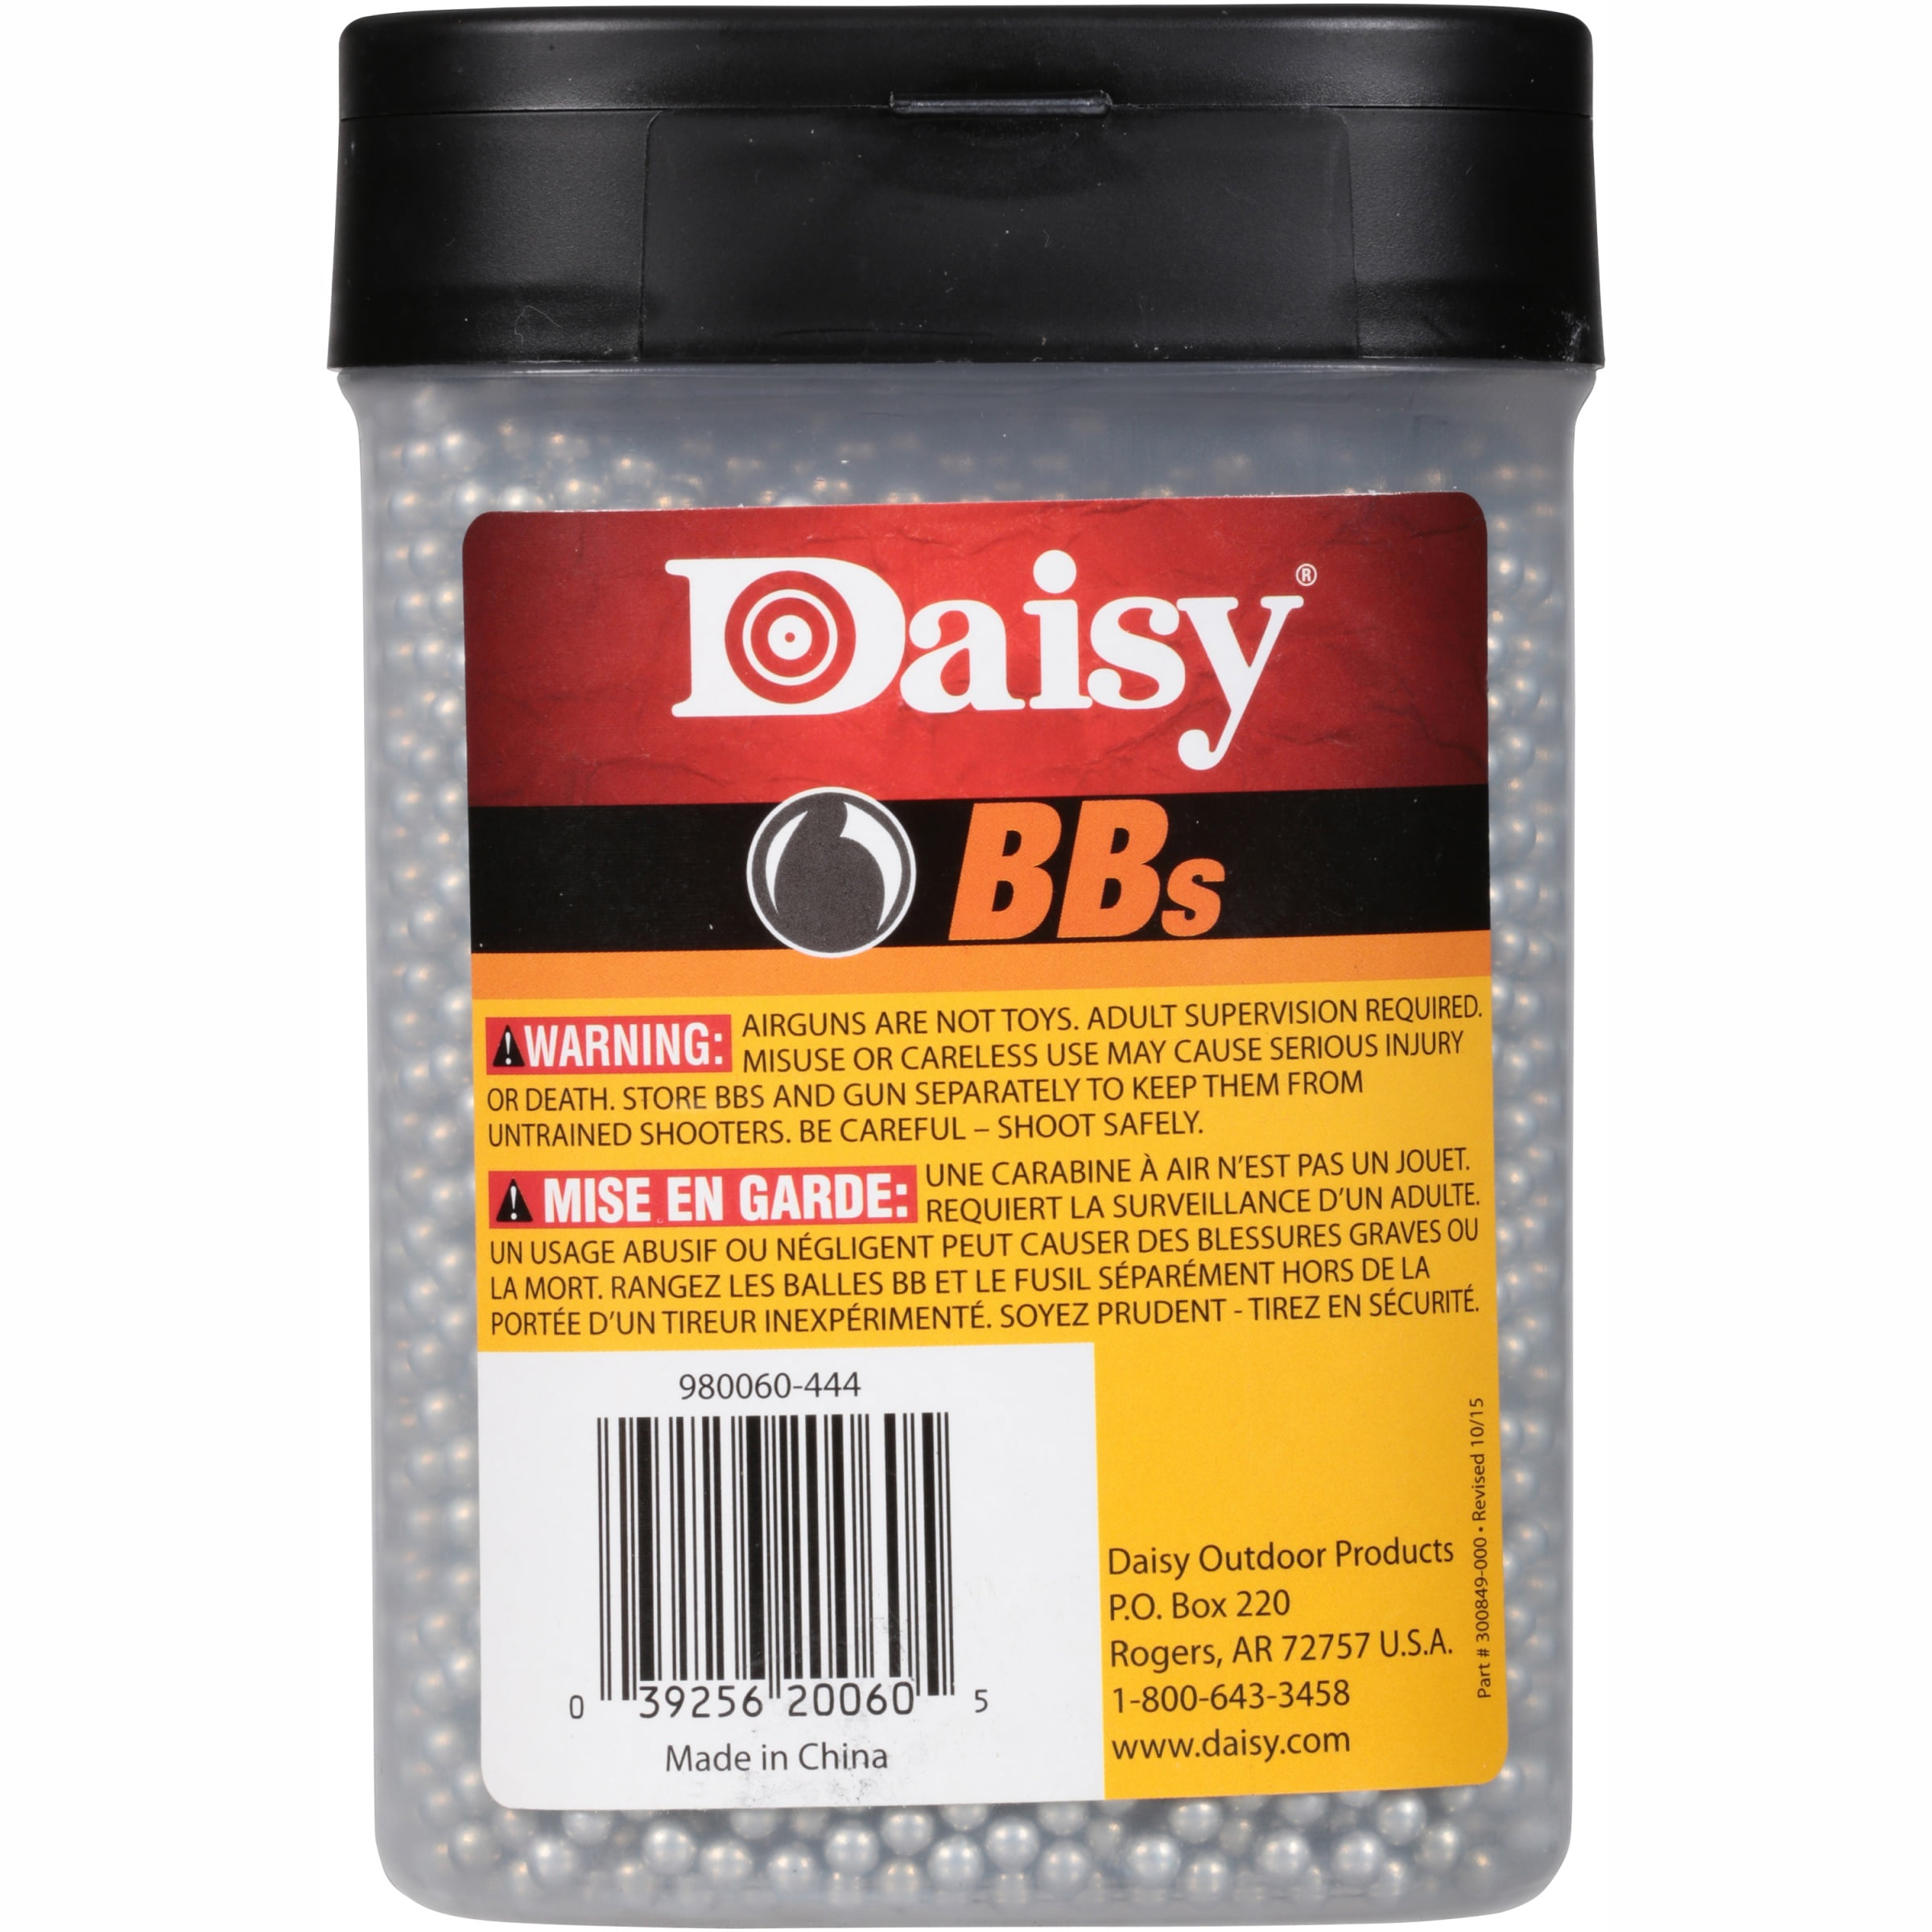 LOT OF 6 Daisy Pointed 987777-406 Precision Max Pellets .177 Caliber 250 Count 39256077771 